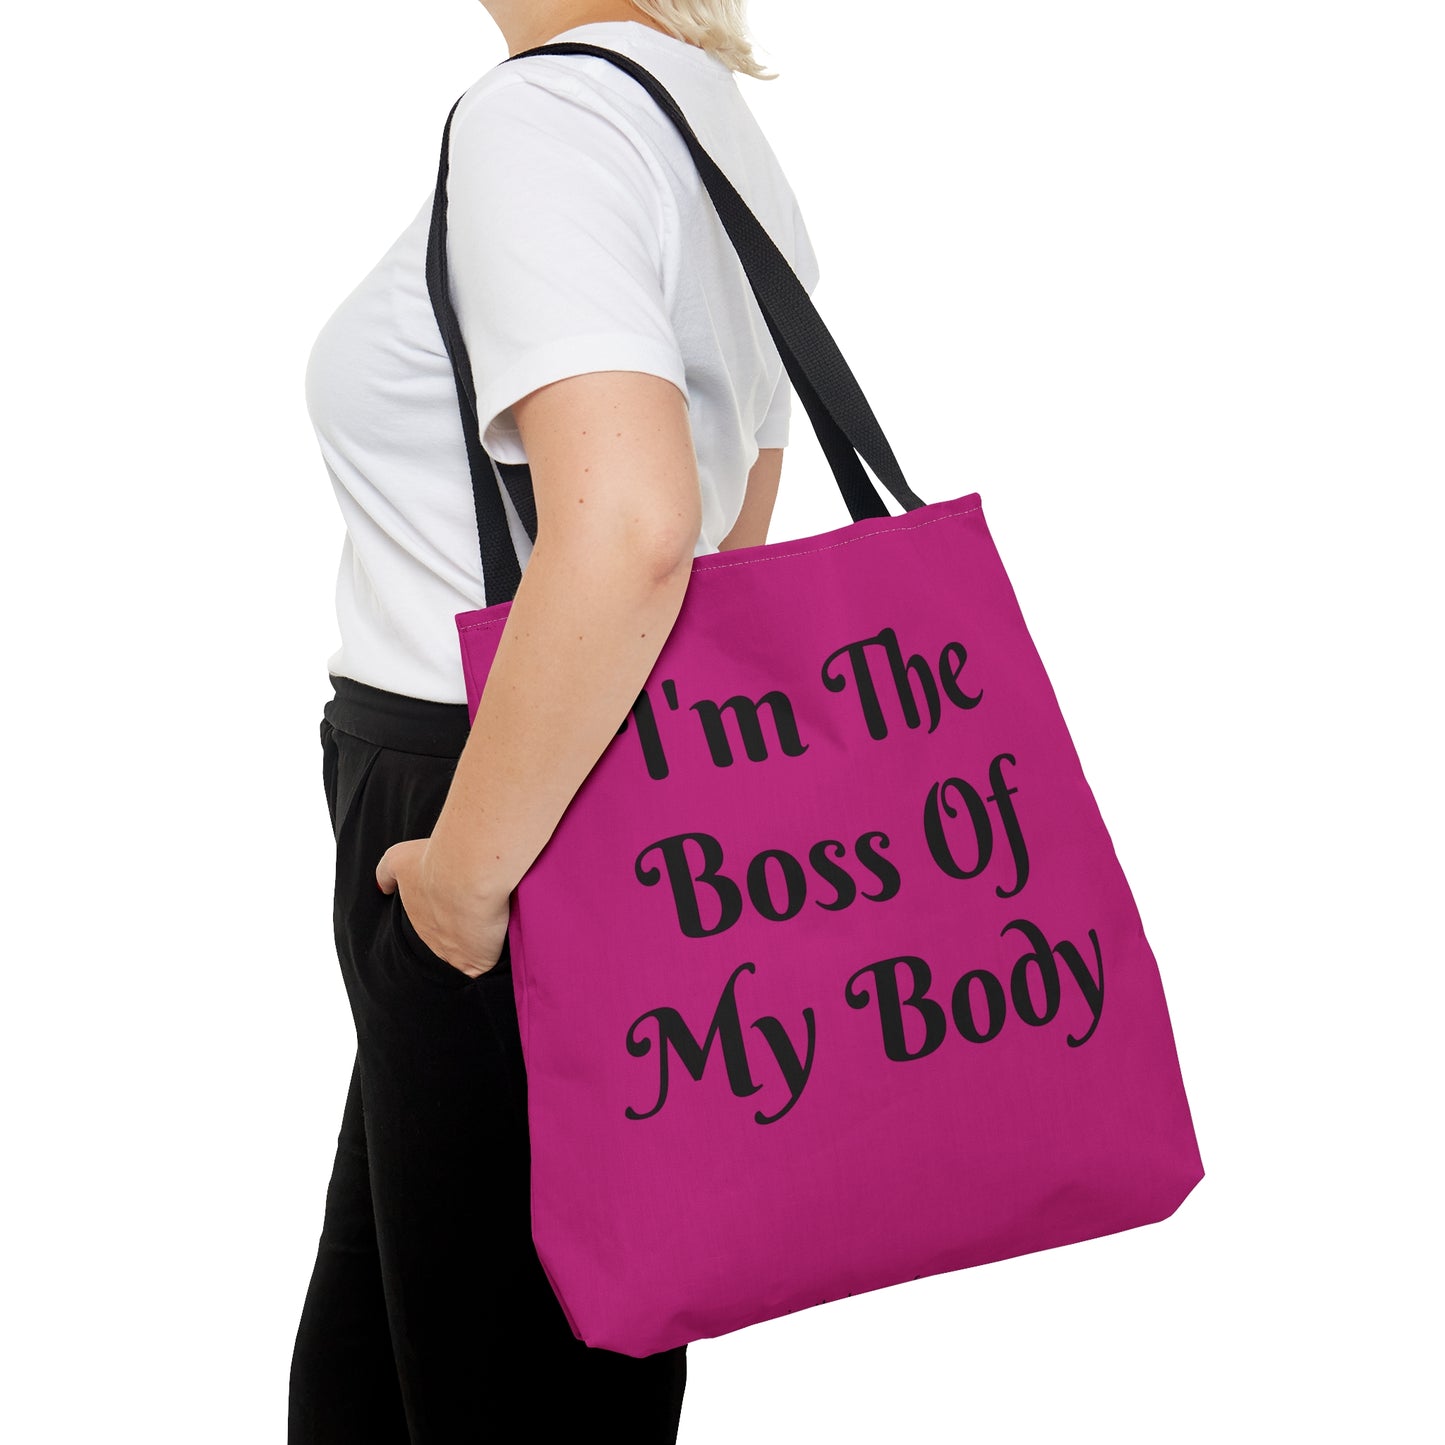 Hot Pink with Black Cotton Handles ITBOM Body Tote Bag